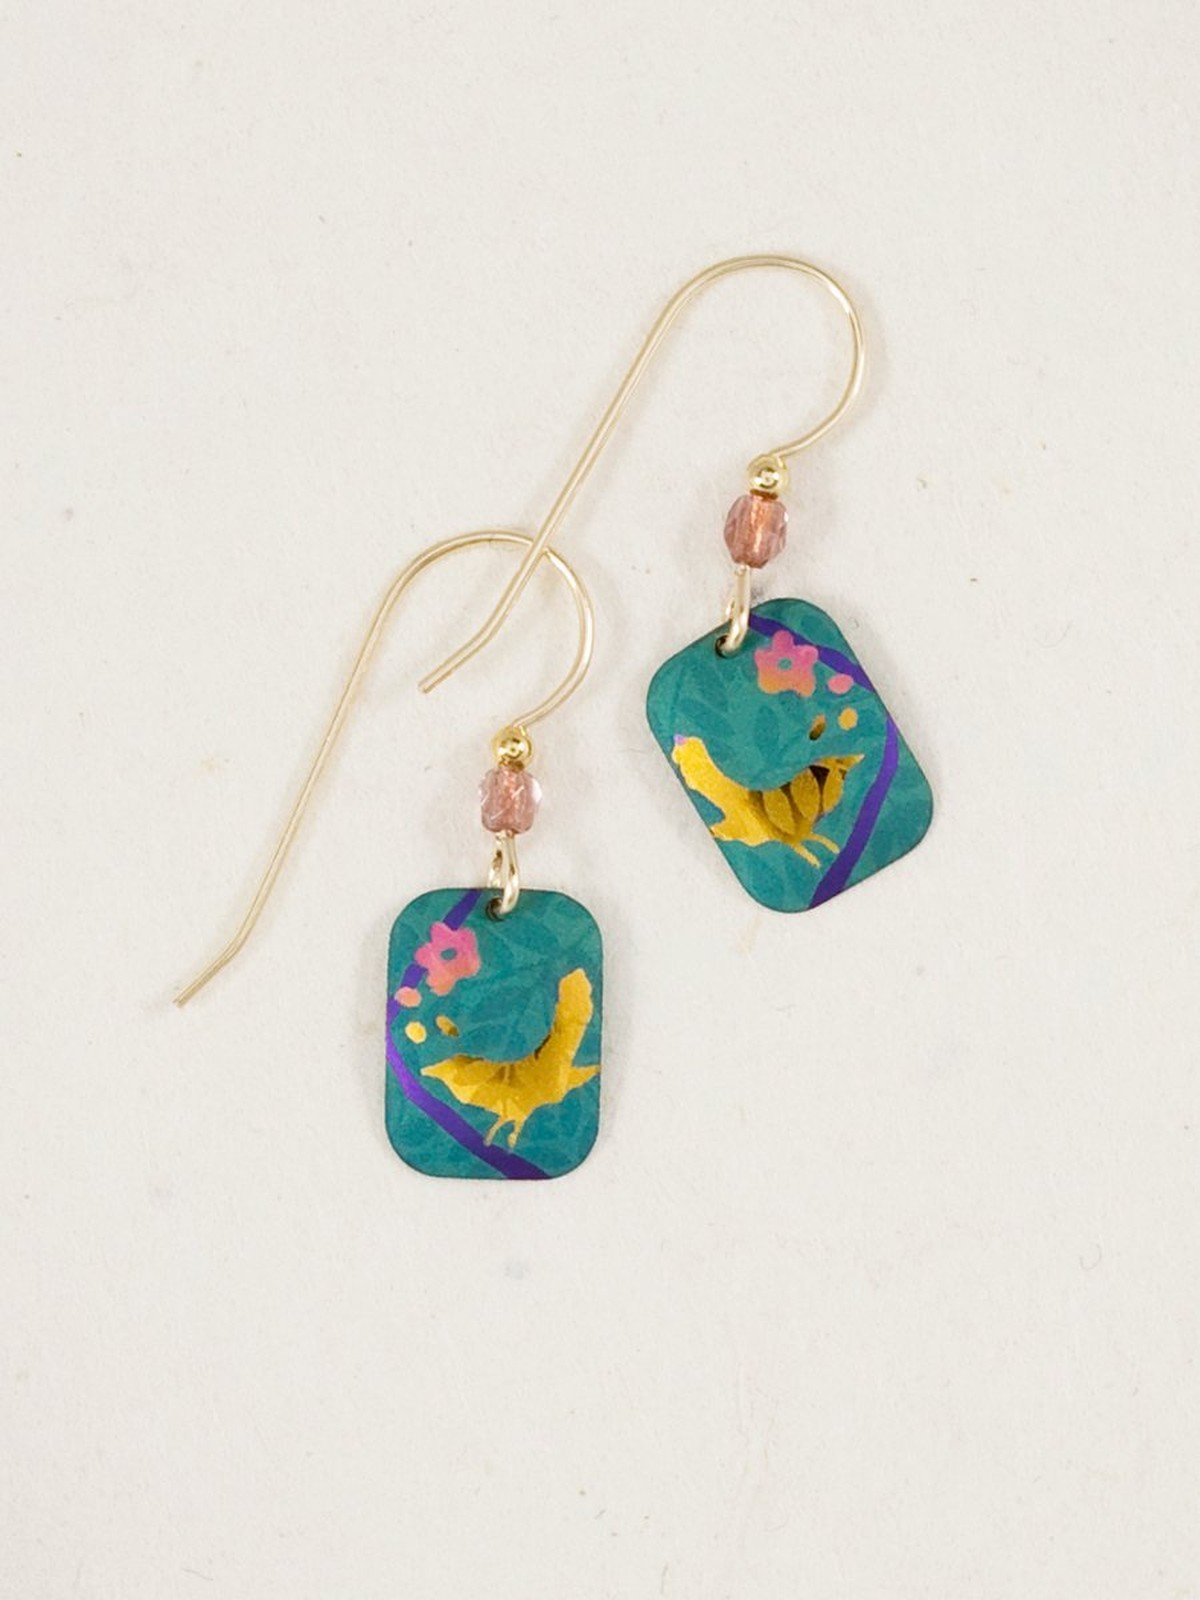 Singing Sparrow earrings from Holly Yashi Jewelry